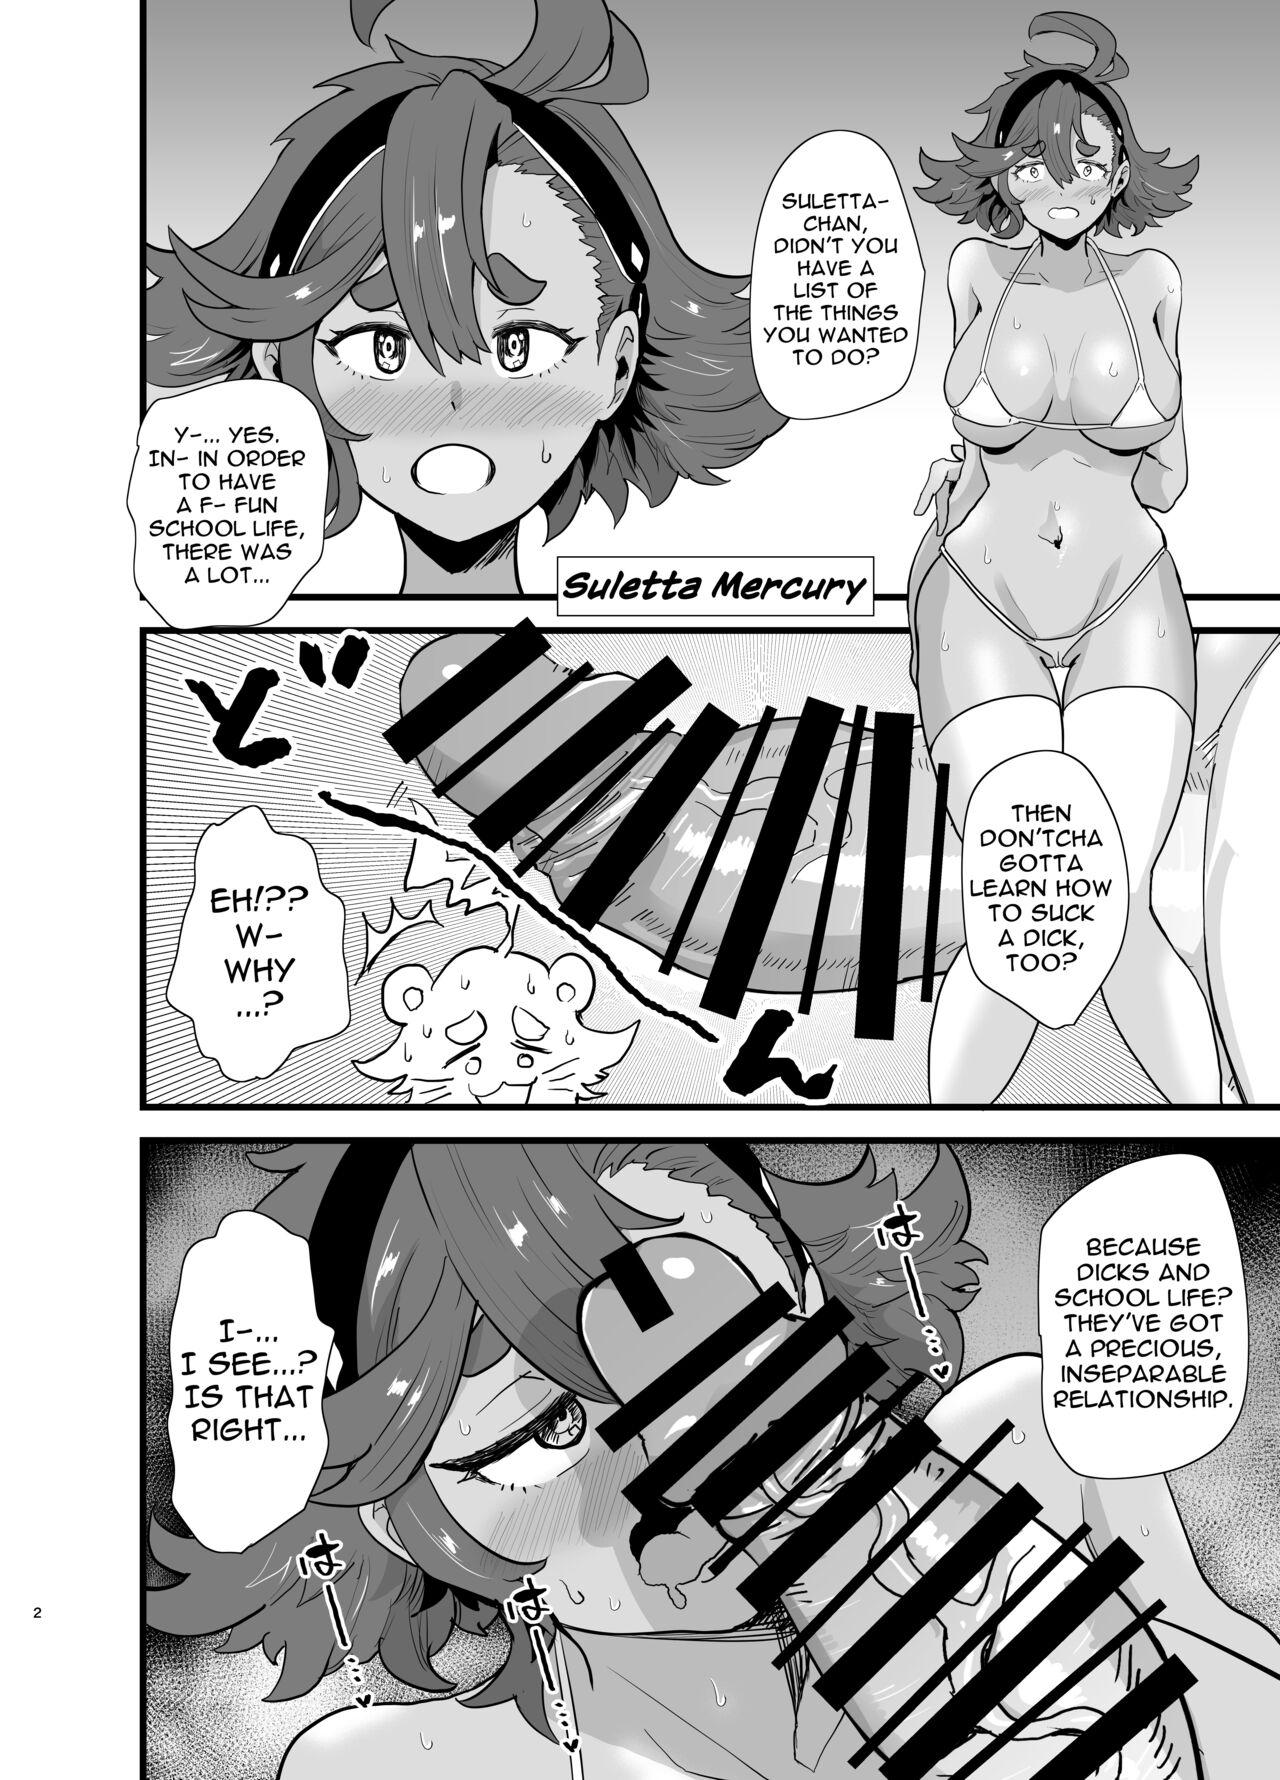 Story Gundam Fuuzoku Musou Suisei no Majo Hen | The Unparalleled Gundam Sex Industry - Witch of Mercury Edition - Mobile suit gundam the witch from mercury Rebolando - Page 3